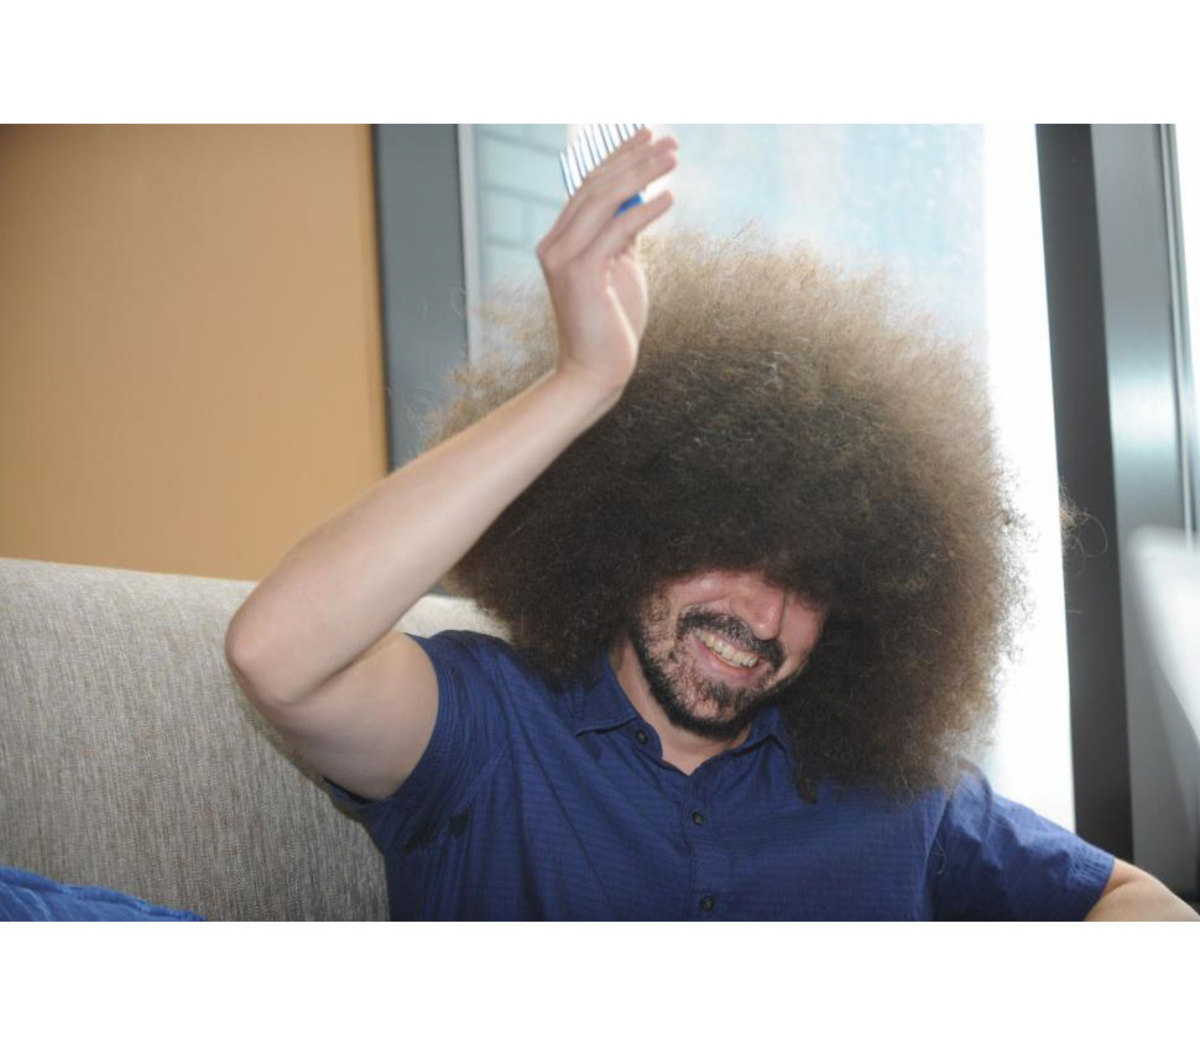 Man earns Guinness World Record for “Largest Male Afro” - Men's Journal